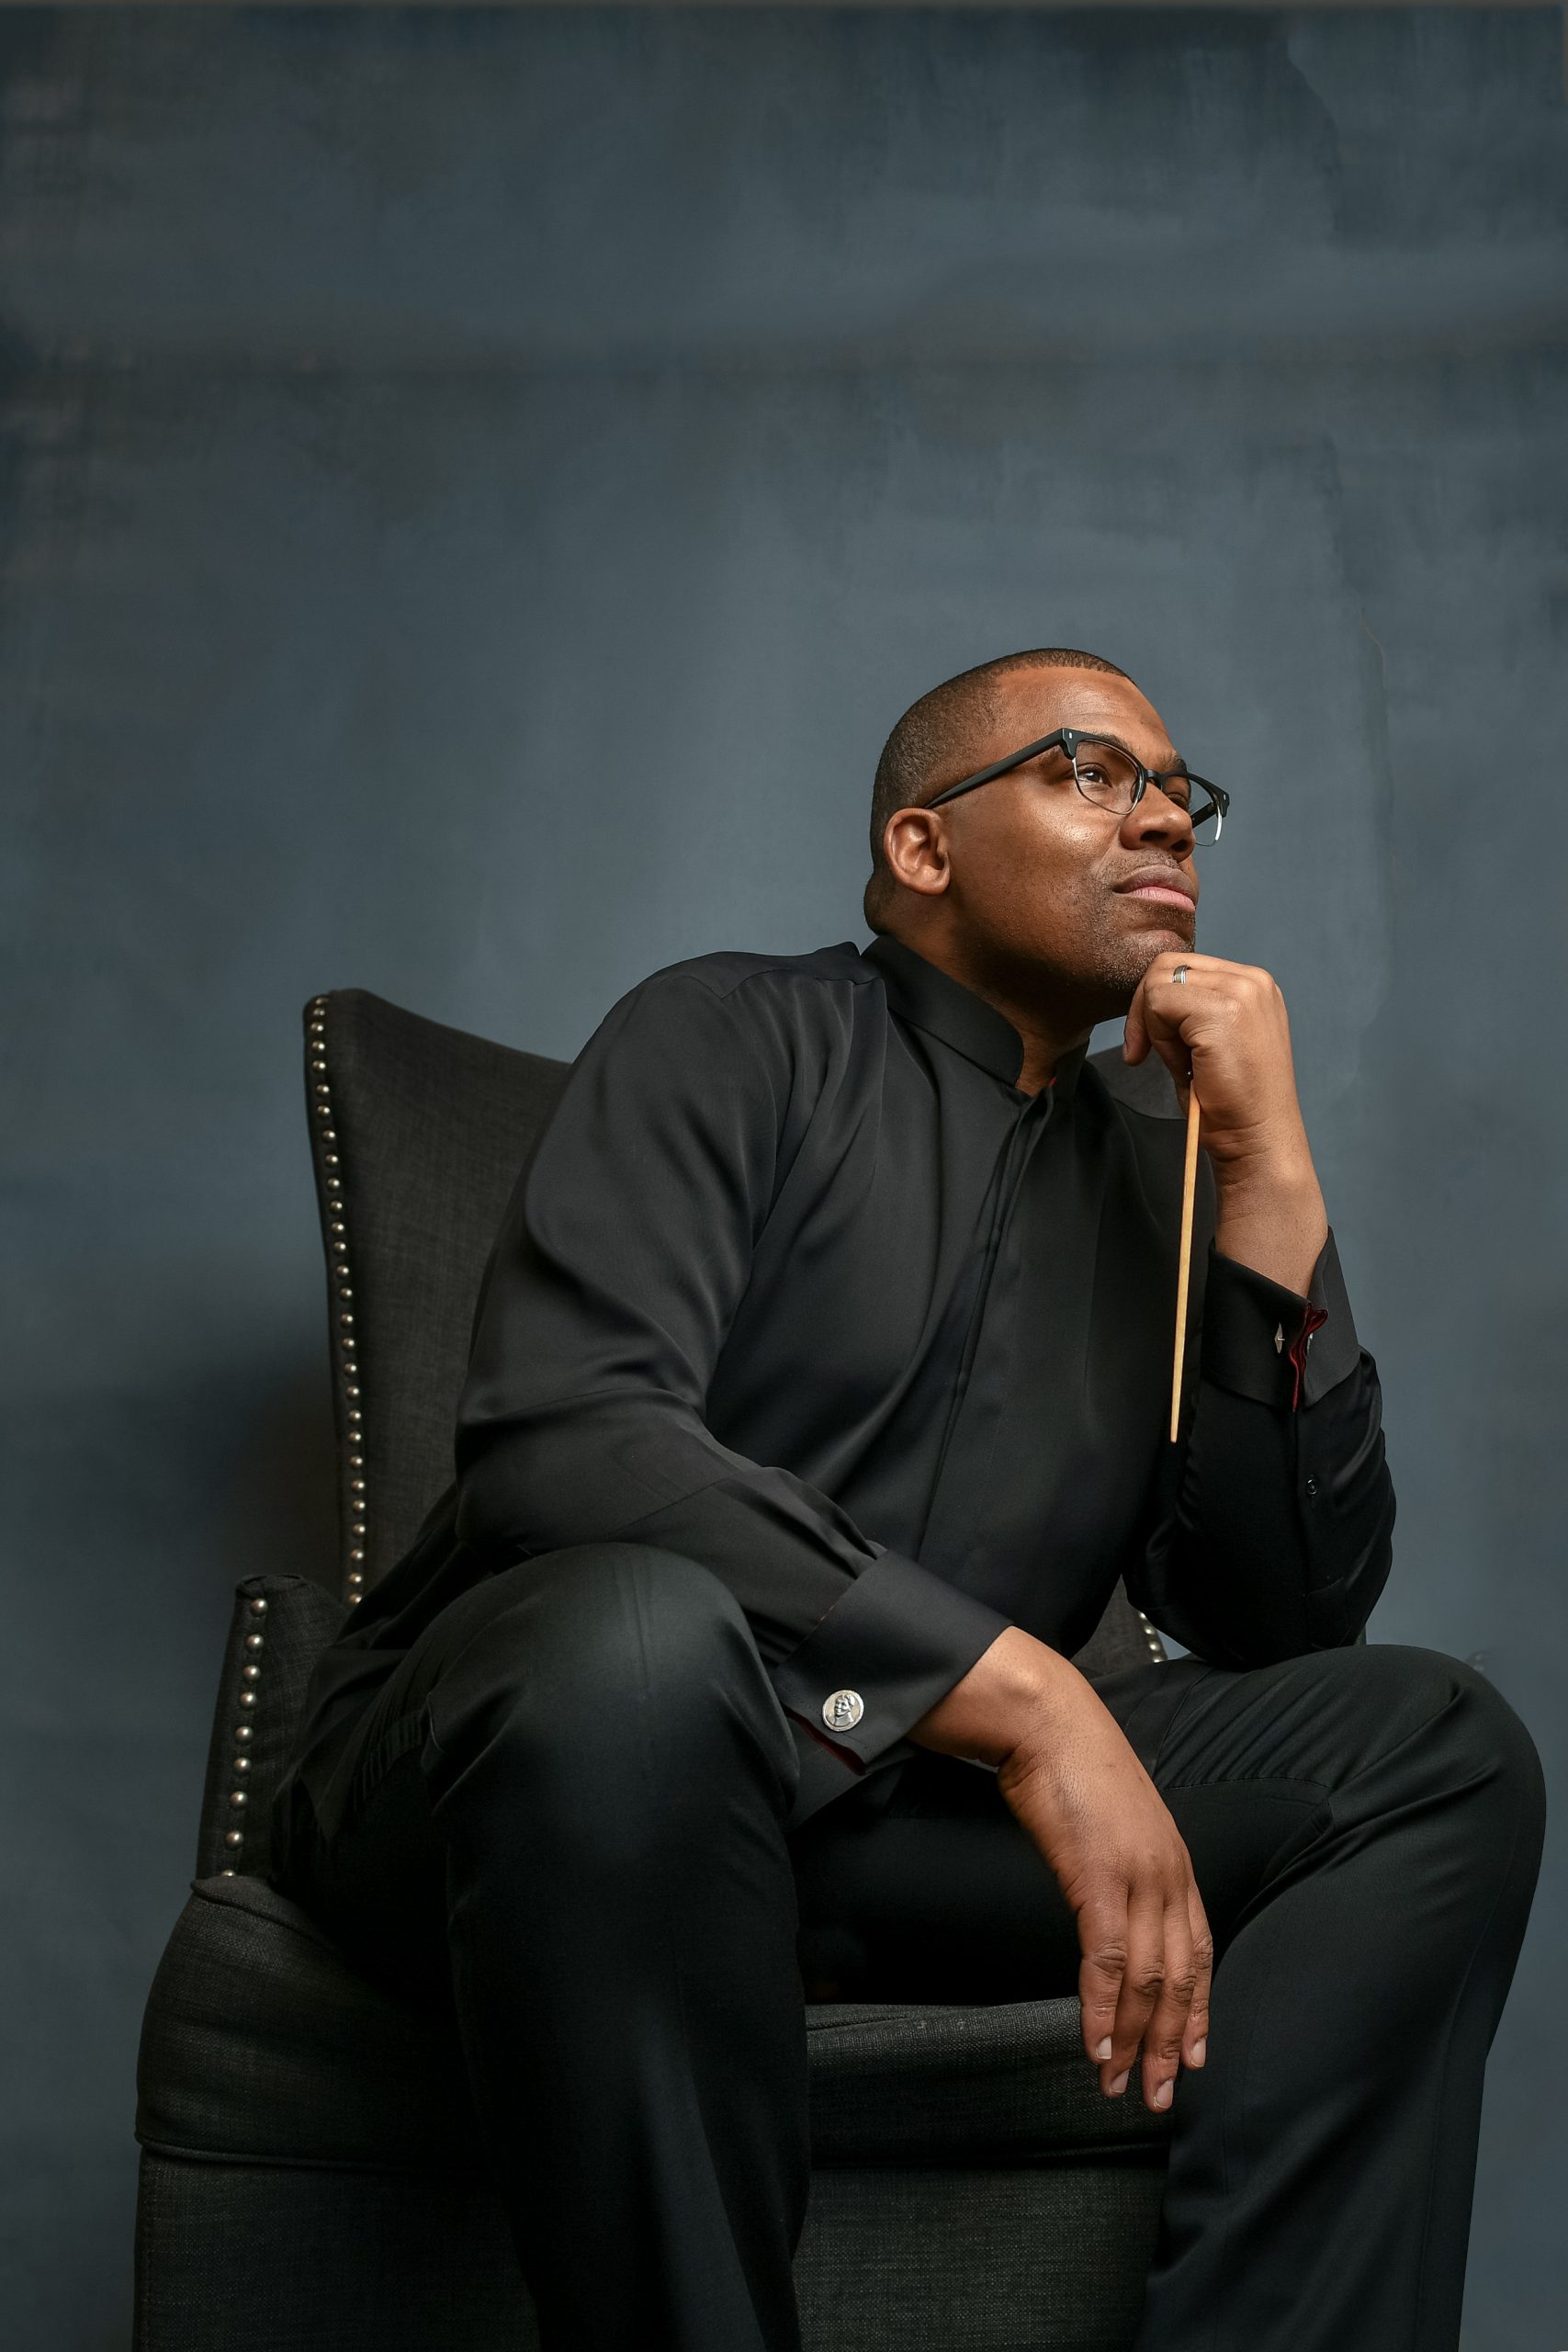 THE MAESTRO SERIES:  Dr. Eugene Rogers joins the ranks of the series hosted on “Across the Arts”